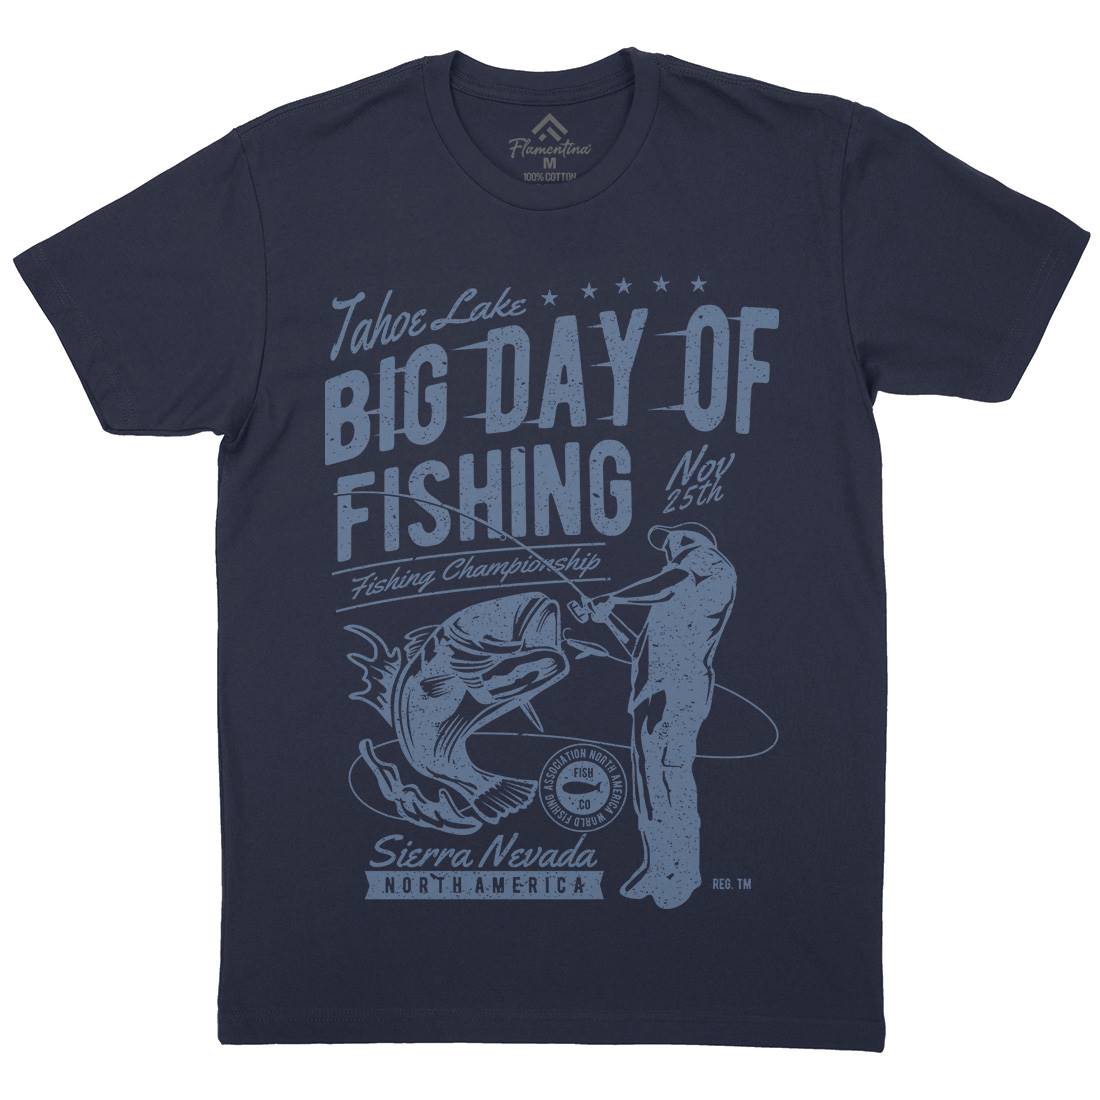 Big Day Of Mens Crew Neck T-Shirt Fishing A618